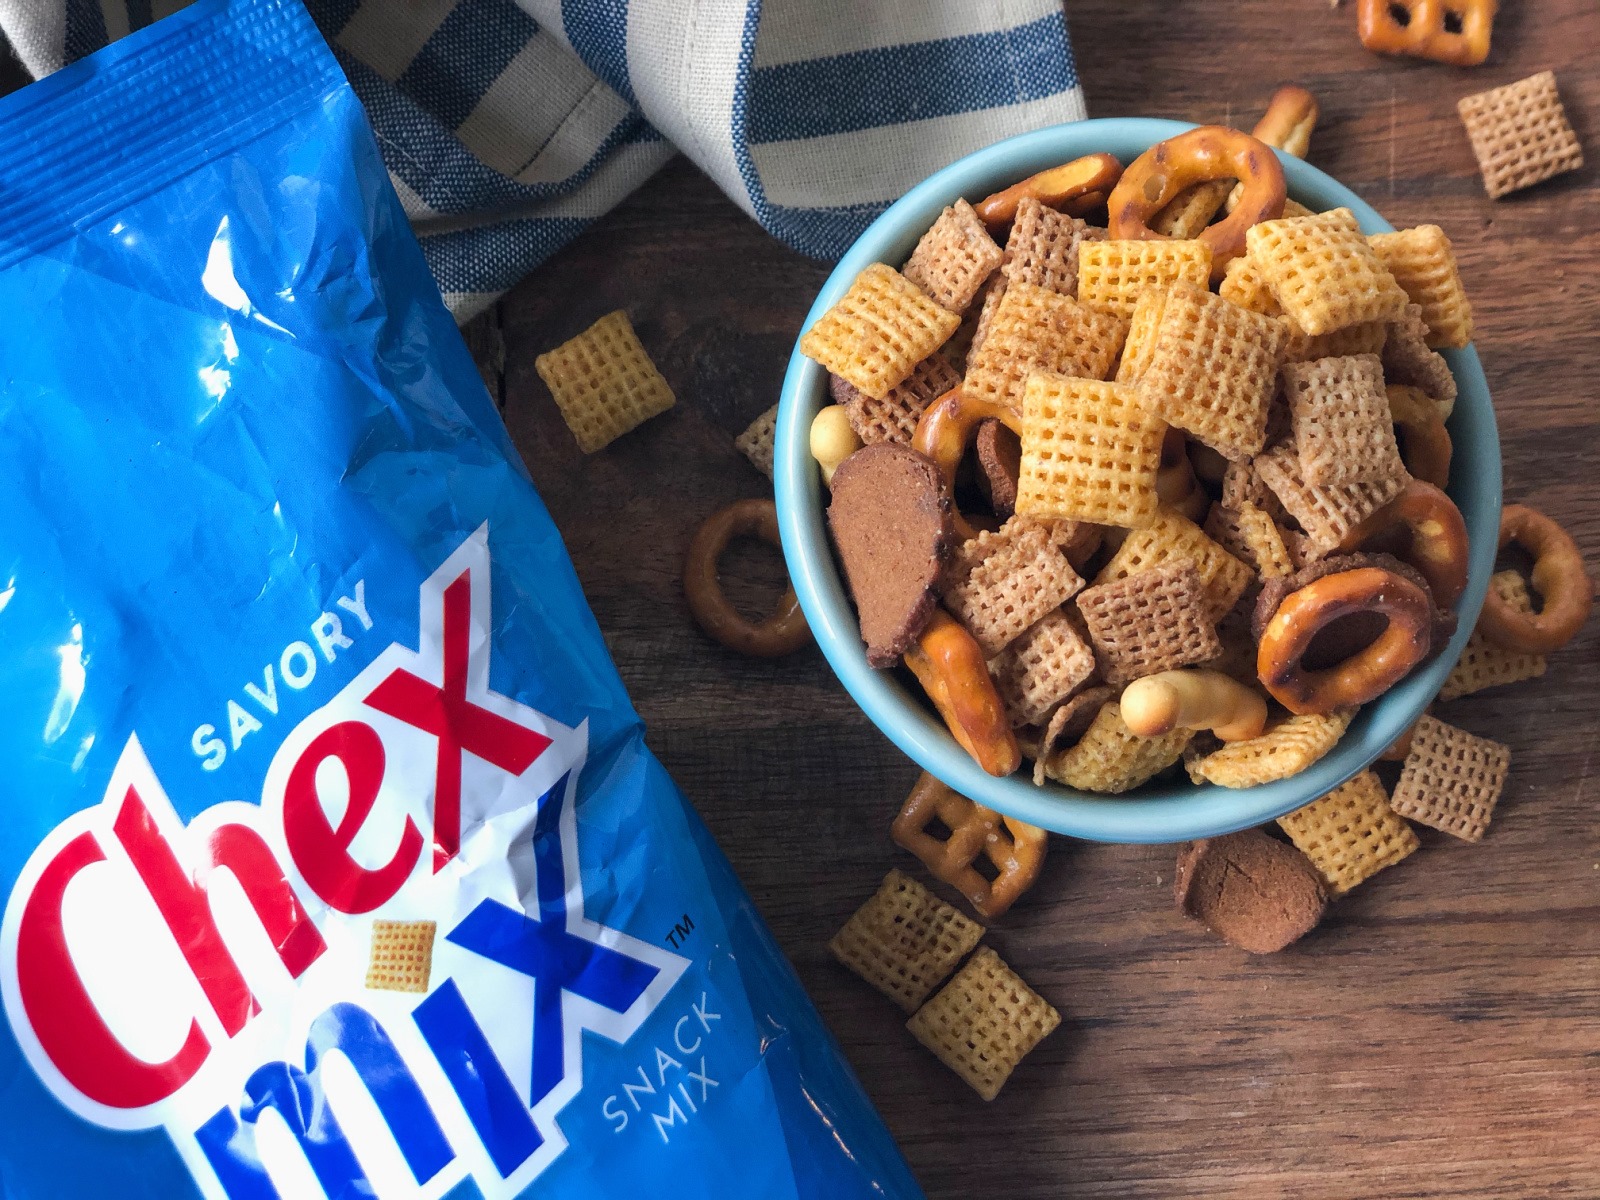 Chex Mix Snacks As Low As $1.49 At Kroger